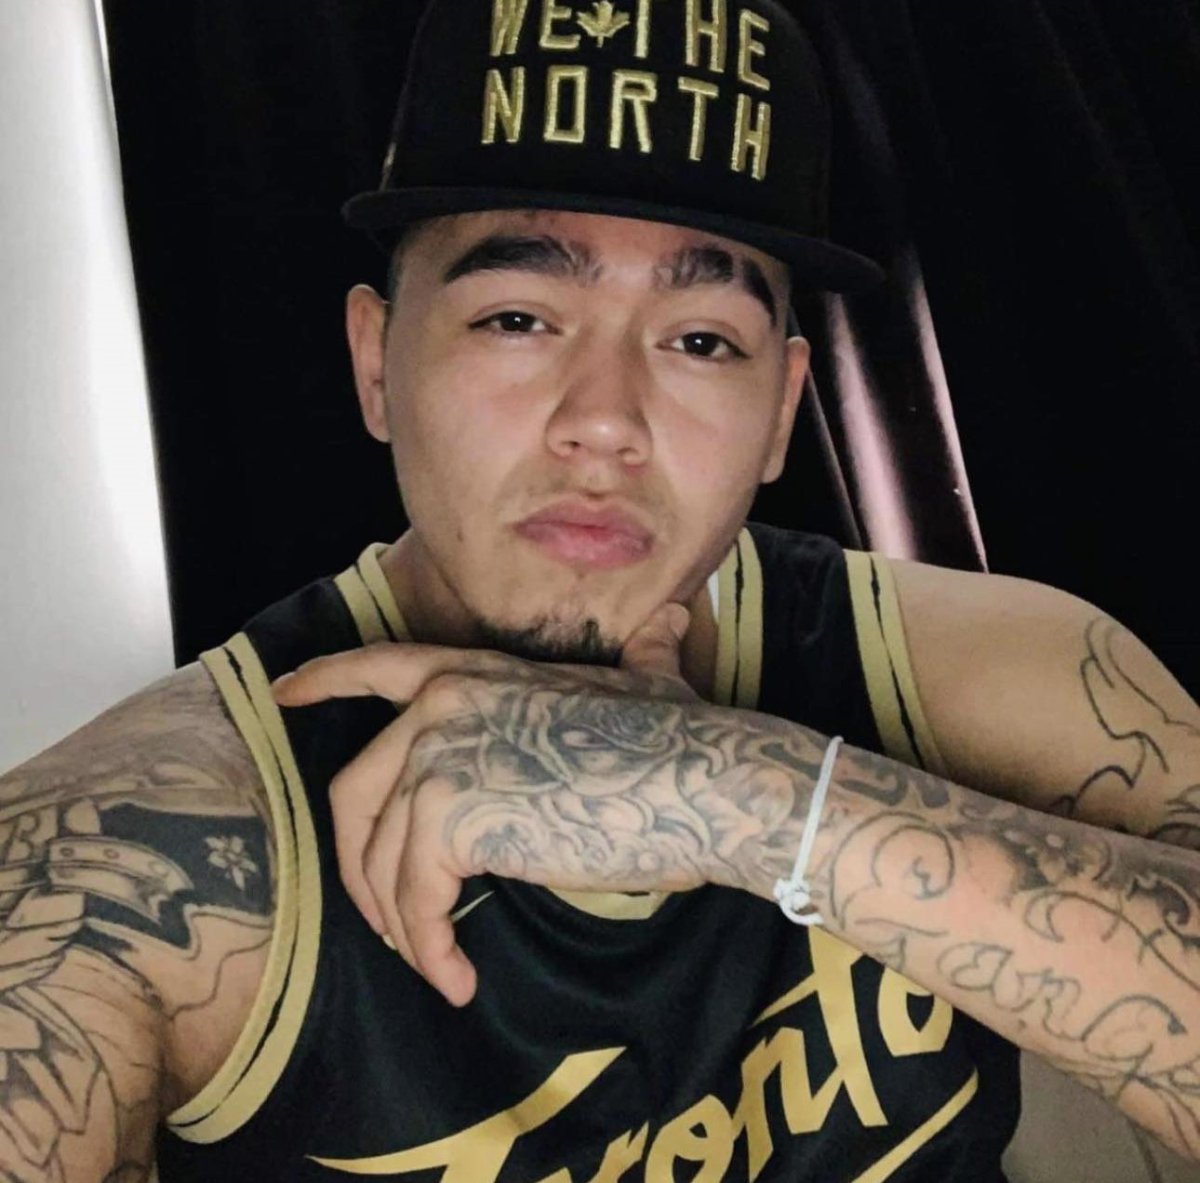 RCMP charged six inmates from the Saskatchewan Penitentiary with second-degree murder in the death of 29-year-old Rocky Meechance.